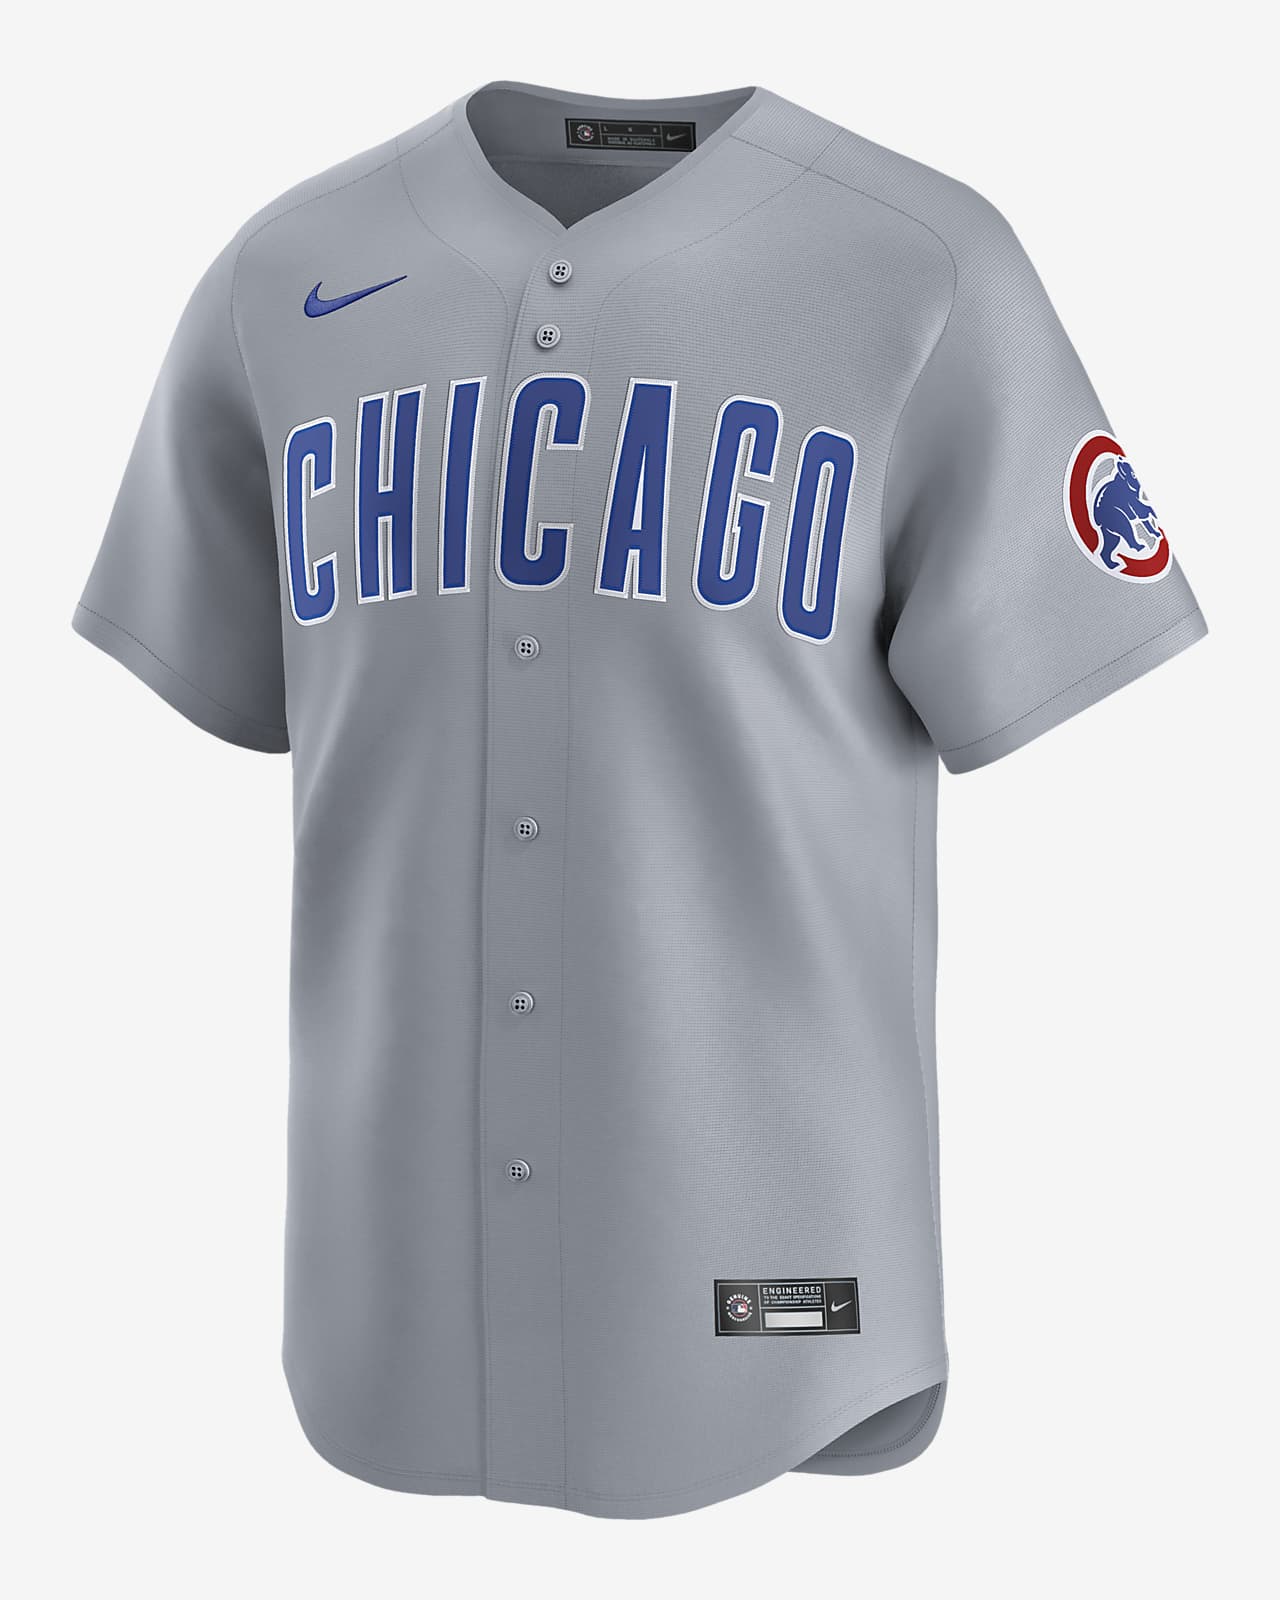 Chicago Cubs Men's Nike Dri-FIT ADV MLB Limited Jersey